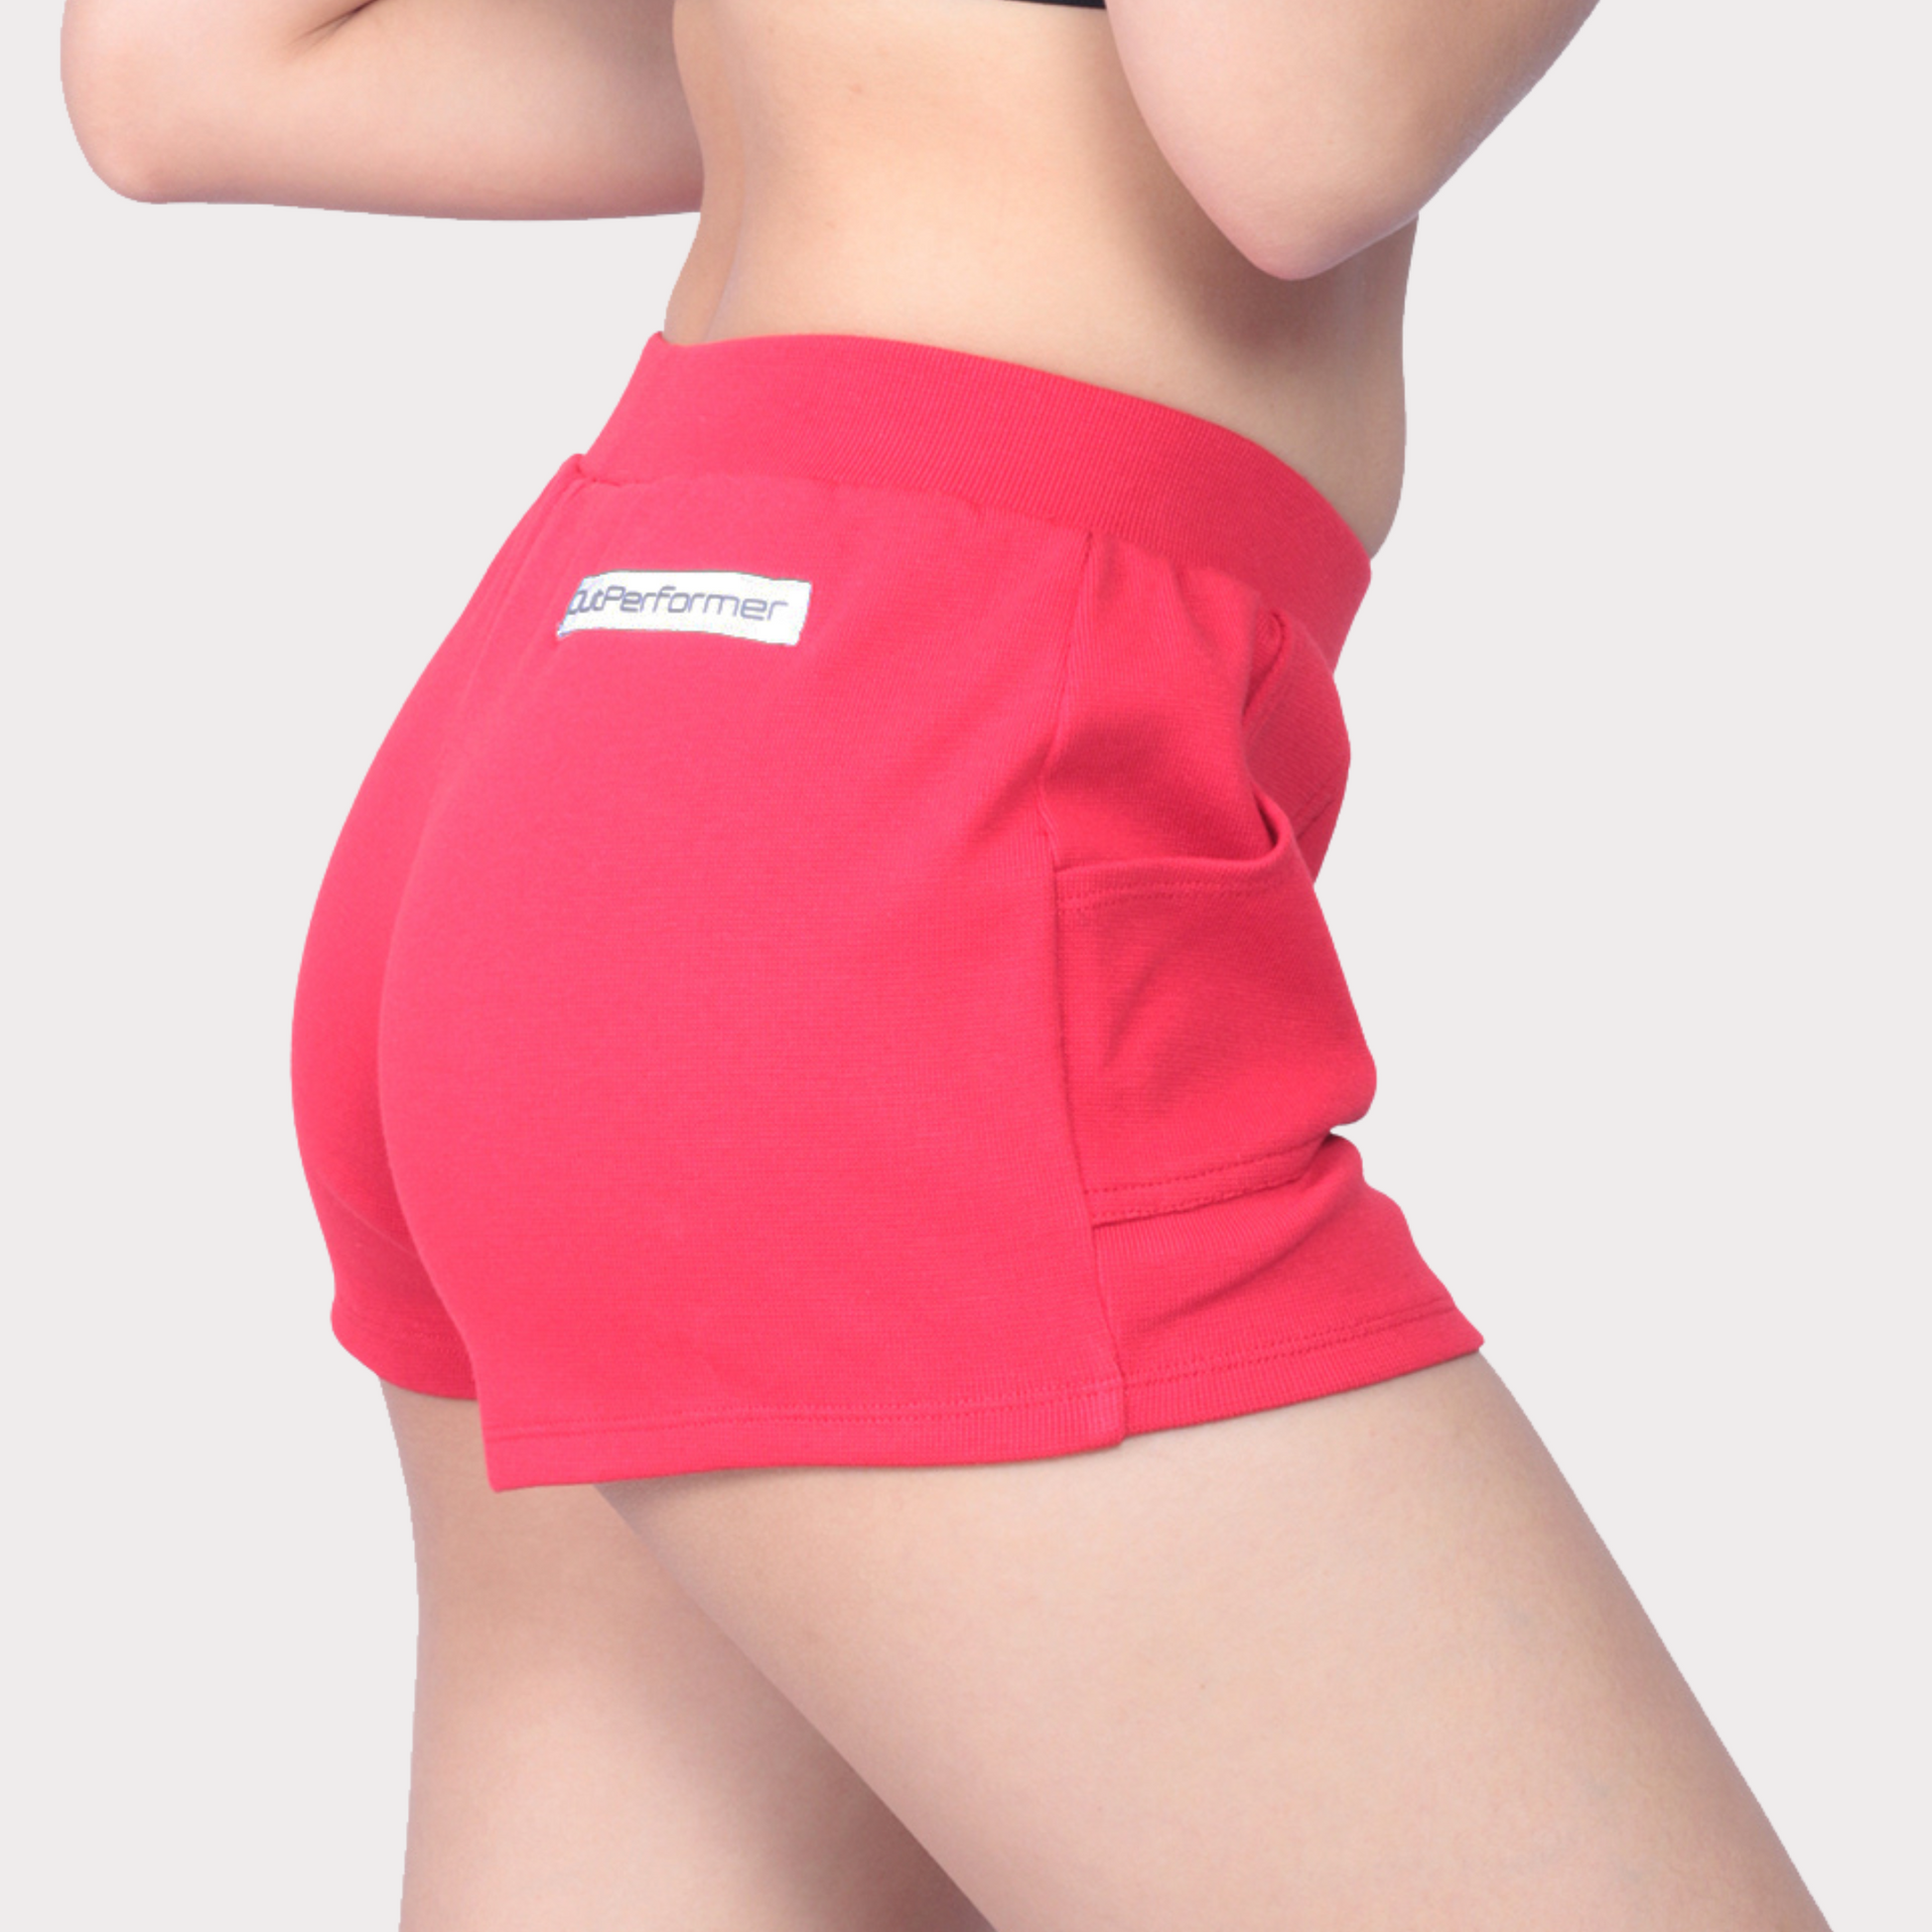 Women's Shorts Activewear / Sportswear - Women's Mini Ribbed Shorts - S / Red - Outperformer